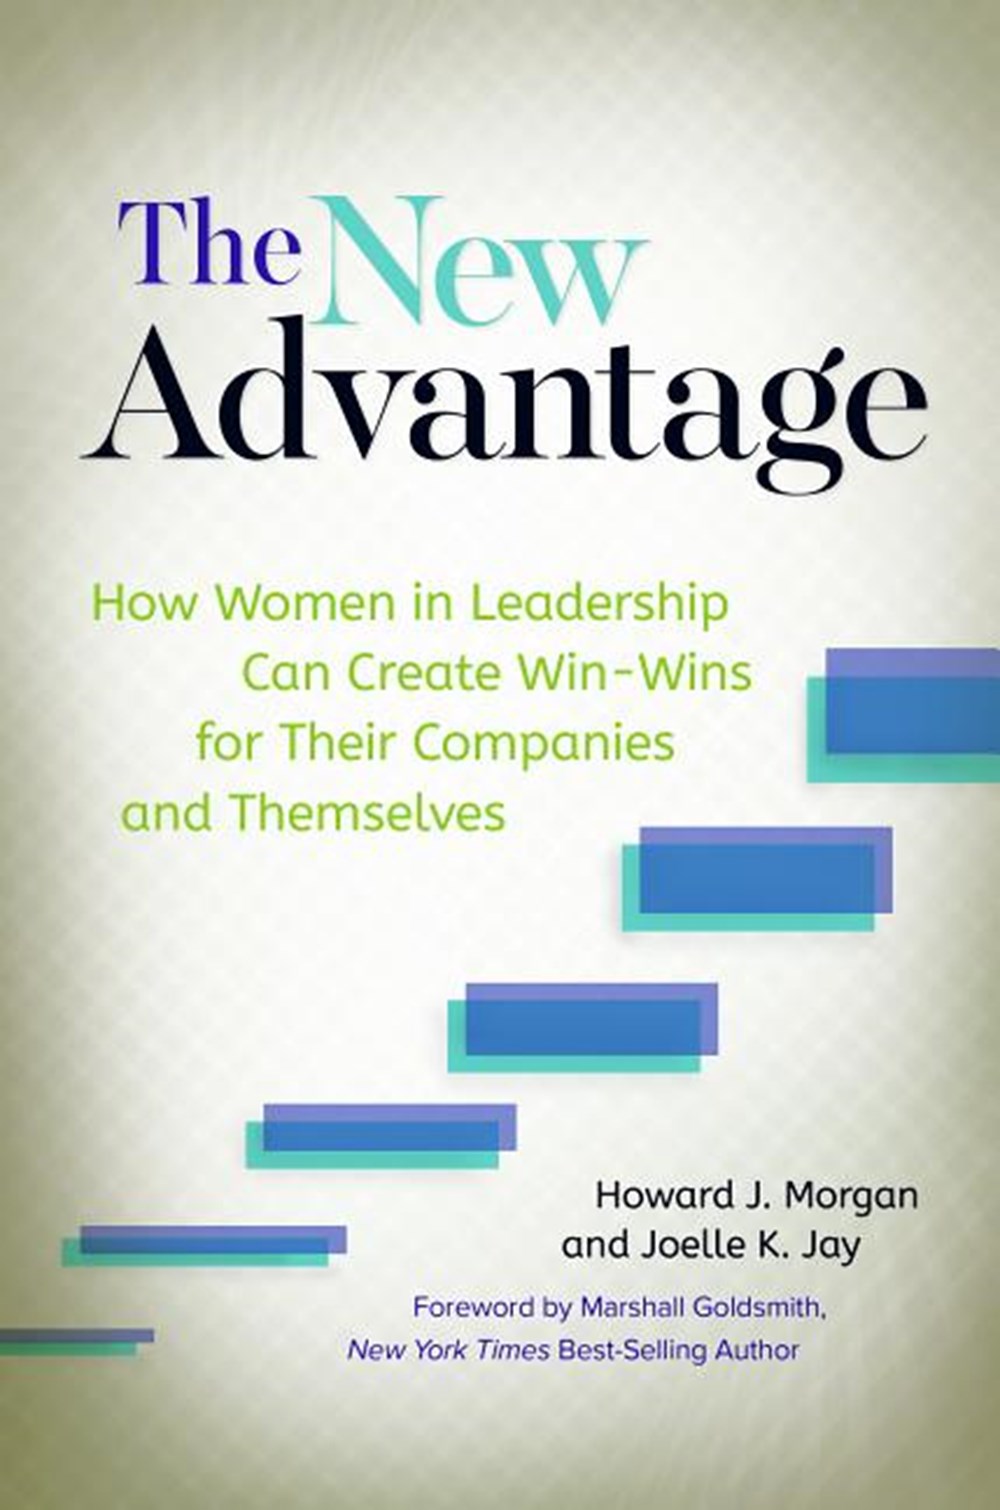 New Advantage: How Women in Leadership Can Create Win-Wins for Their Companies and Themselves